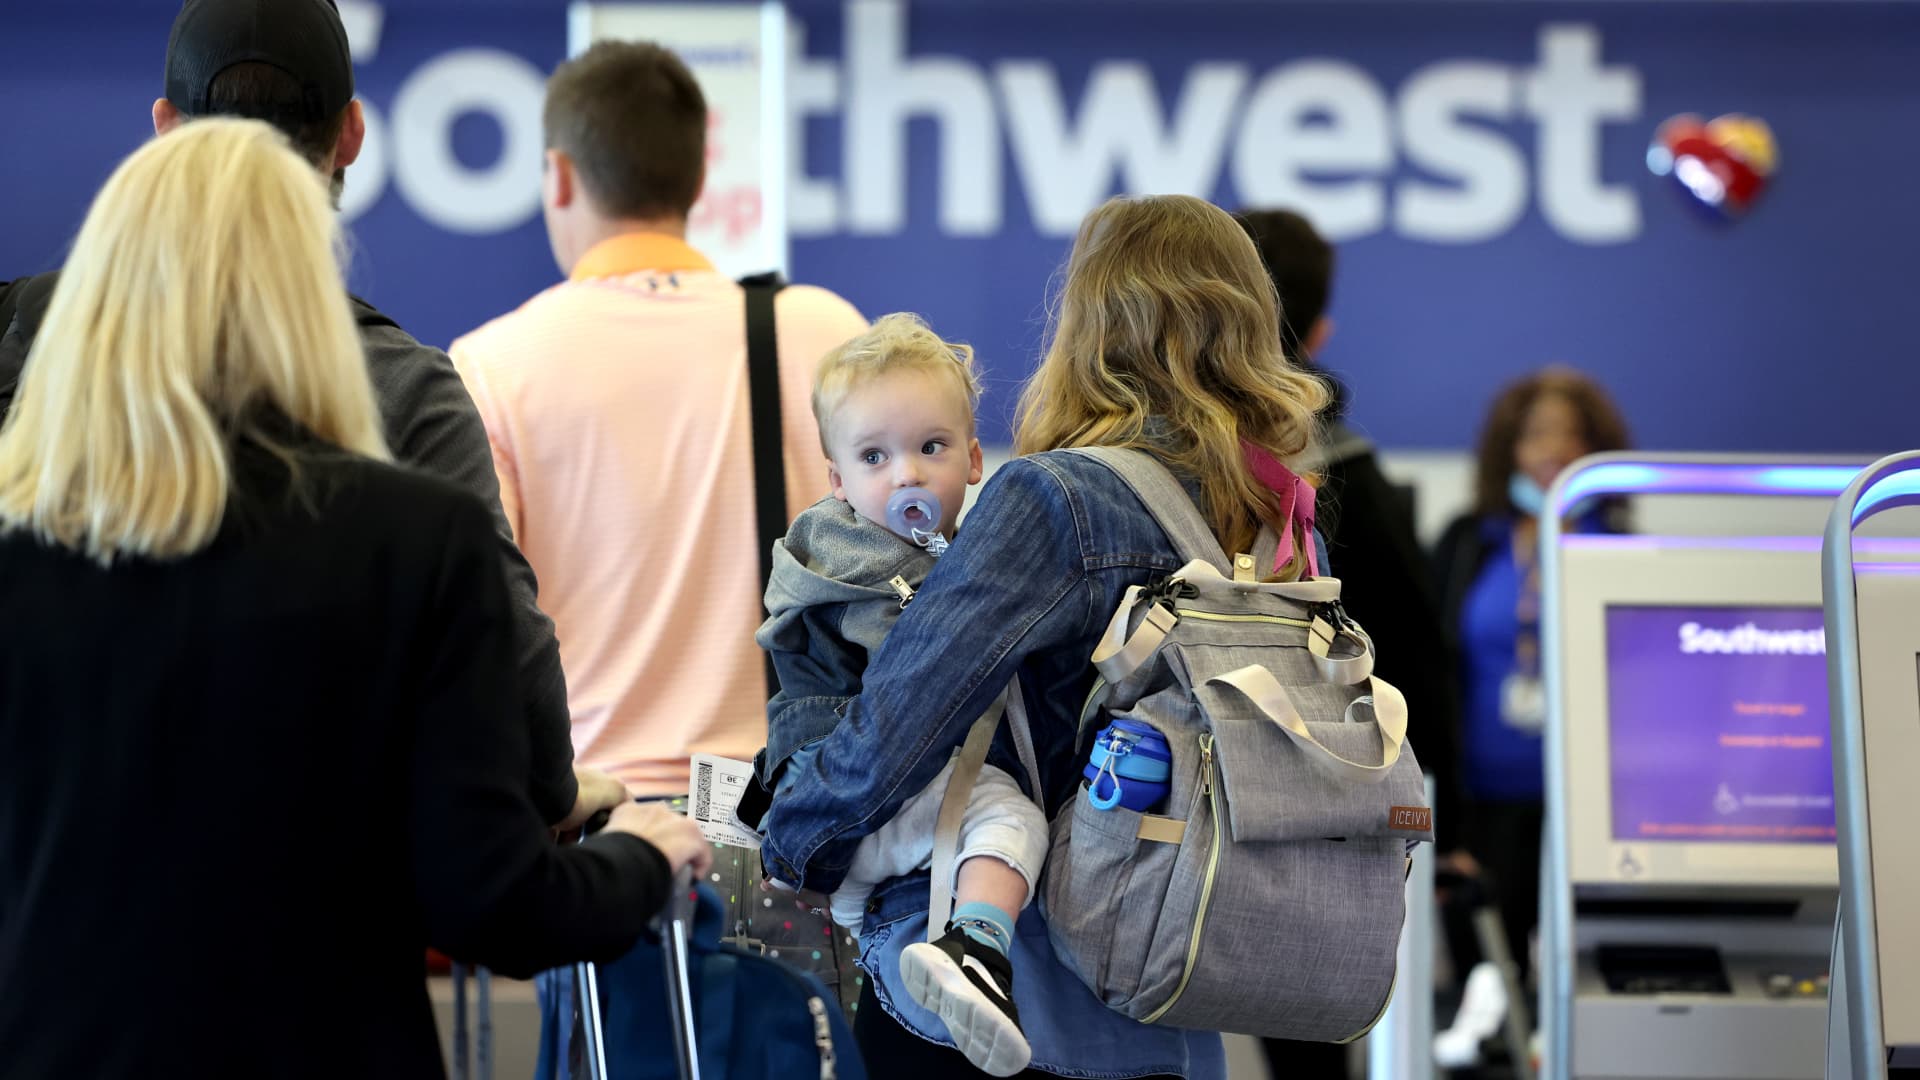 More than half of Southwest Airlines flights delayed after technology problem paused departures